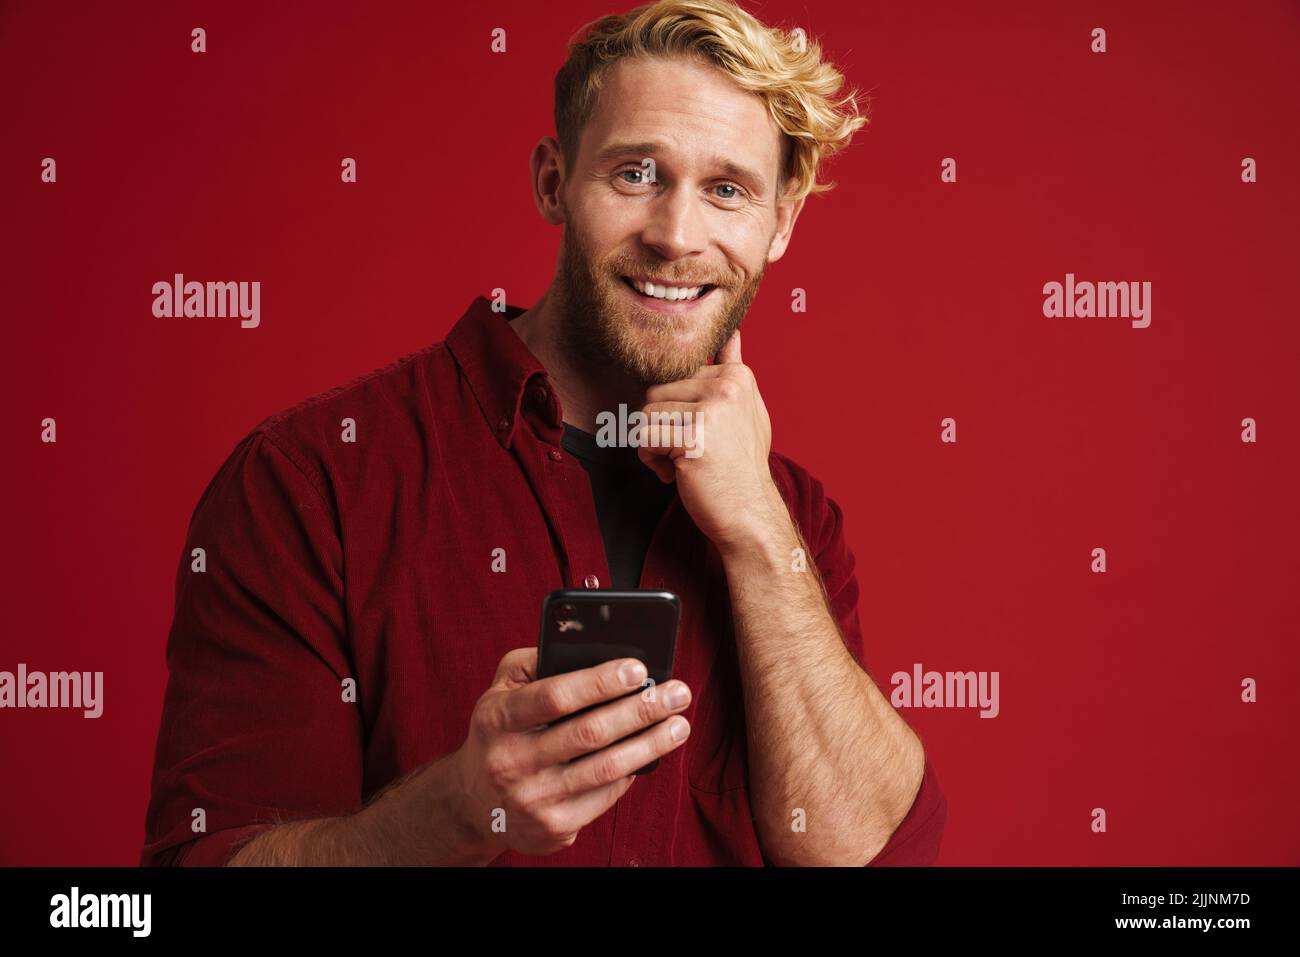 Bearded blonde man smiling and using mobile phone isolated over red background Stock Photo